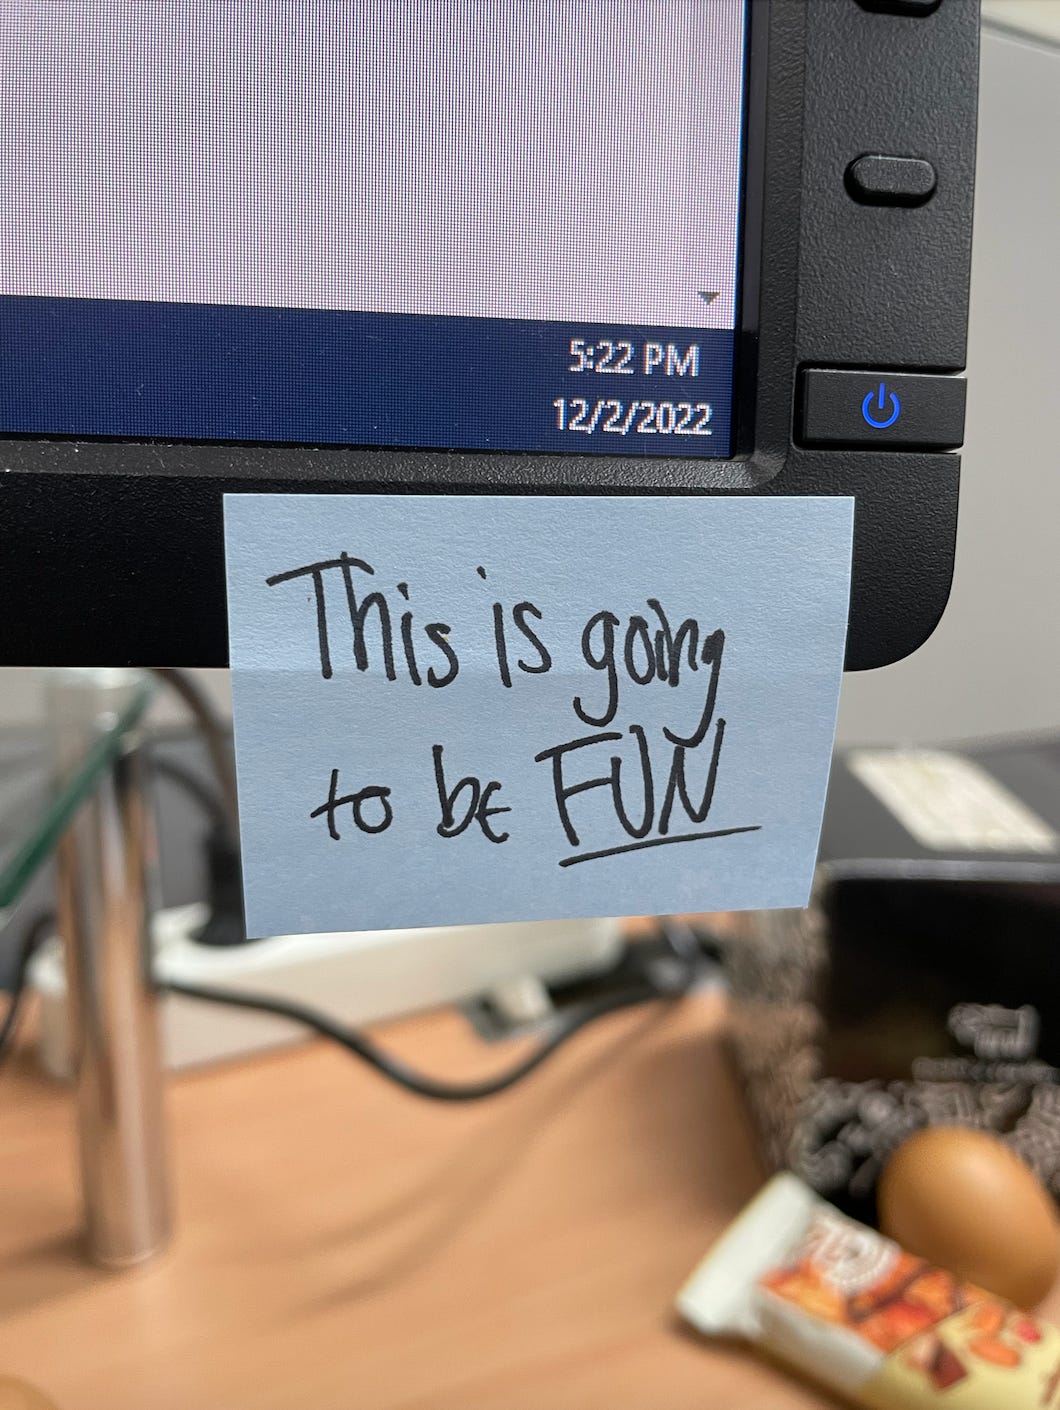 A photo of Kat's computer monitor. A post-it note is stuck to the screen. It says, "This is going to be fun."